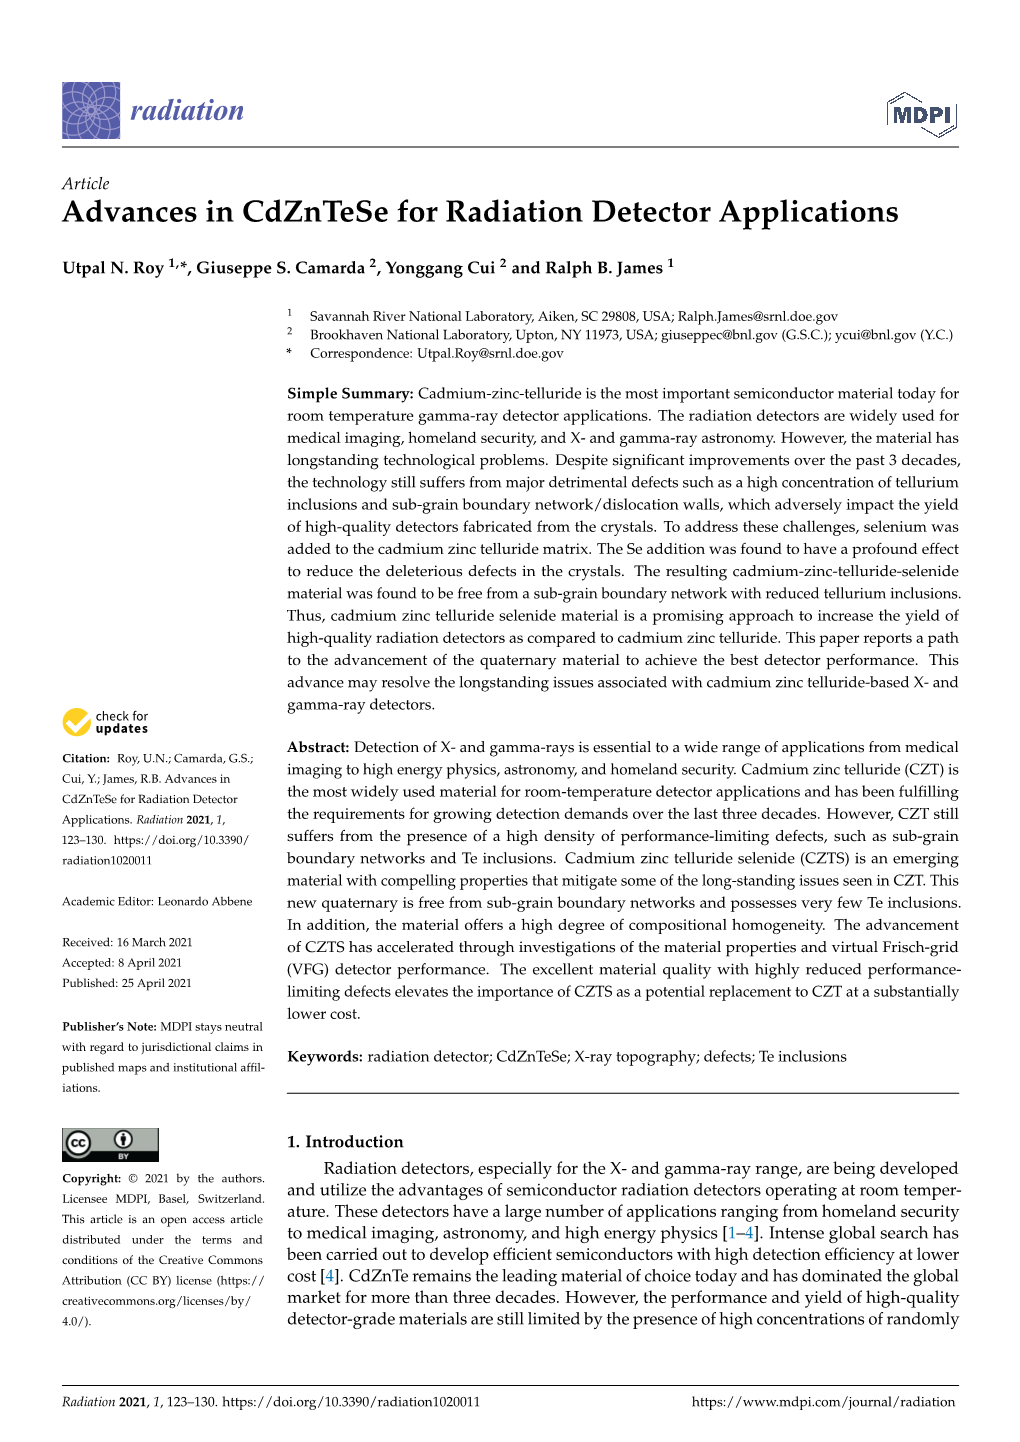 Advances in Cdzntese for Radiation Detector Applications